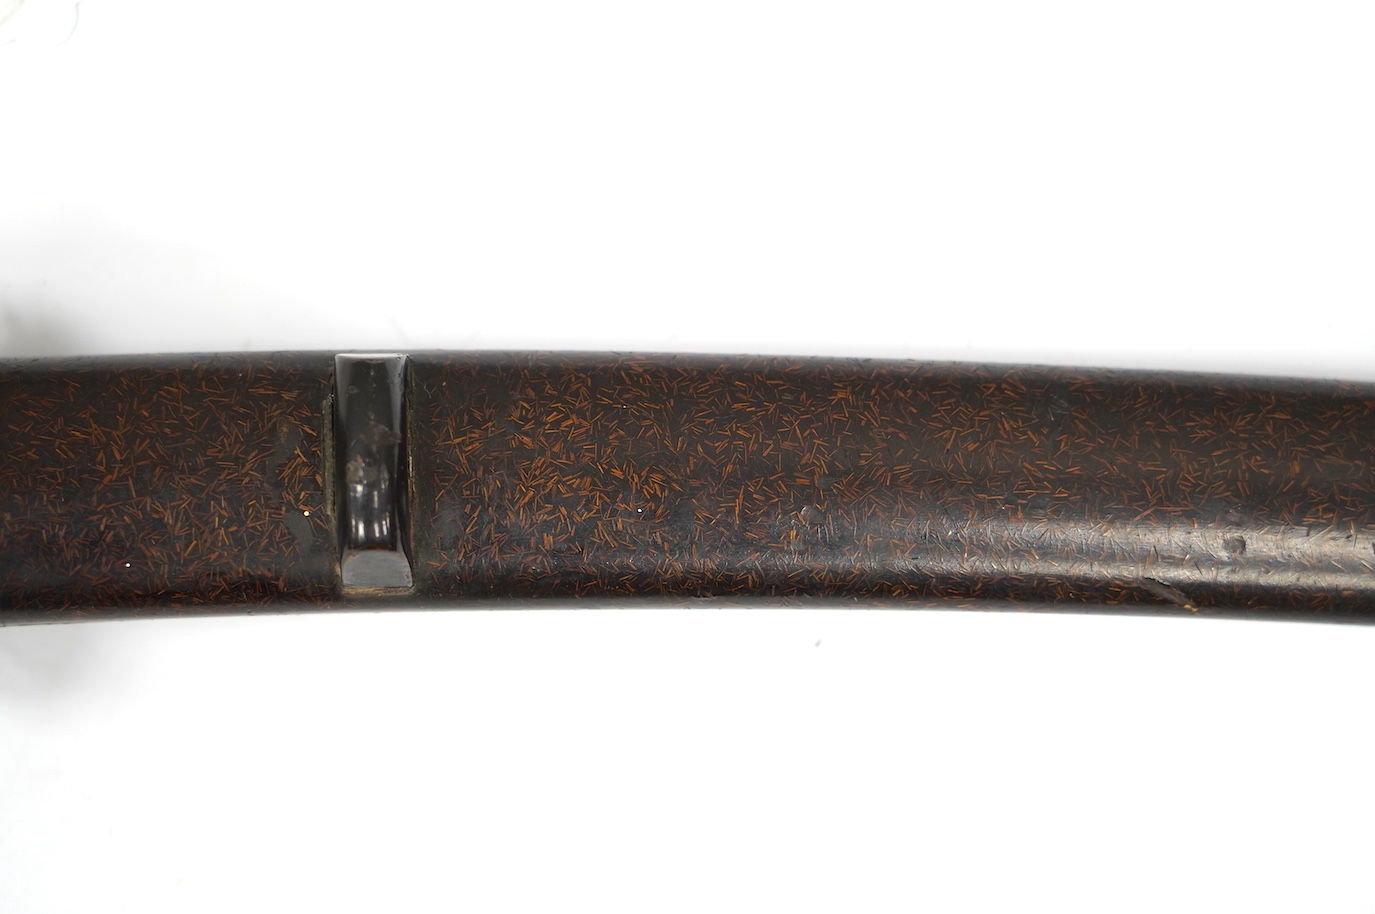 A 19th century Japanese wakizashi with scabbard, blade 31.5cm. Condition - fair, age worn overall